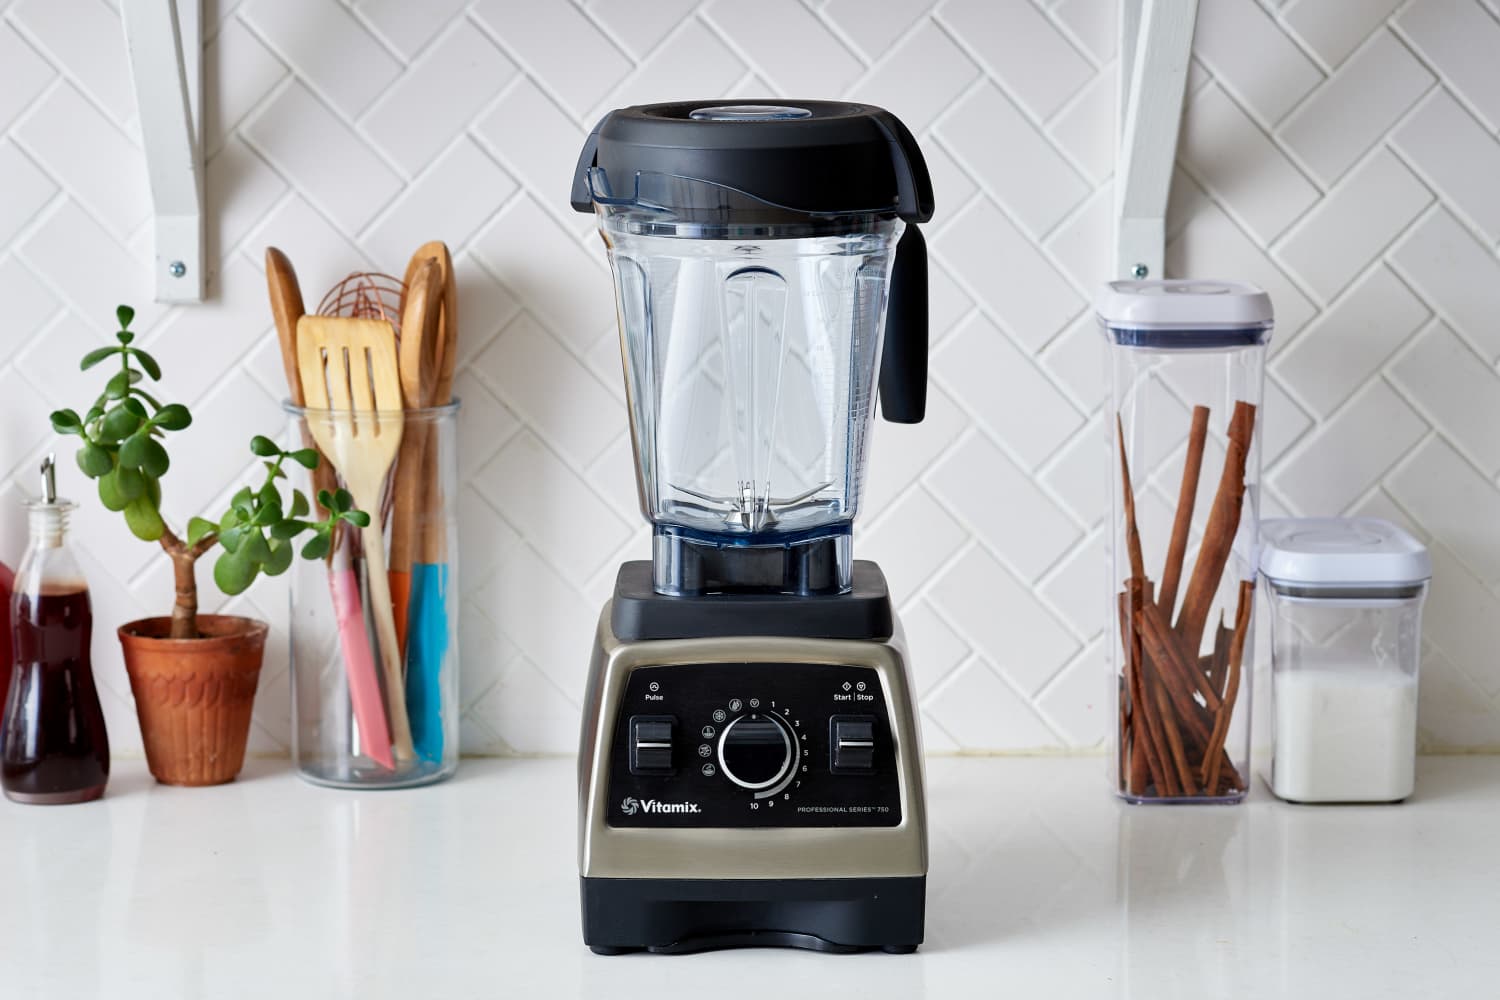 These Are Some of the Lowest Prices We’ve Ever Seen on Vitamix Blenders